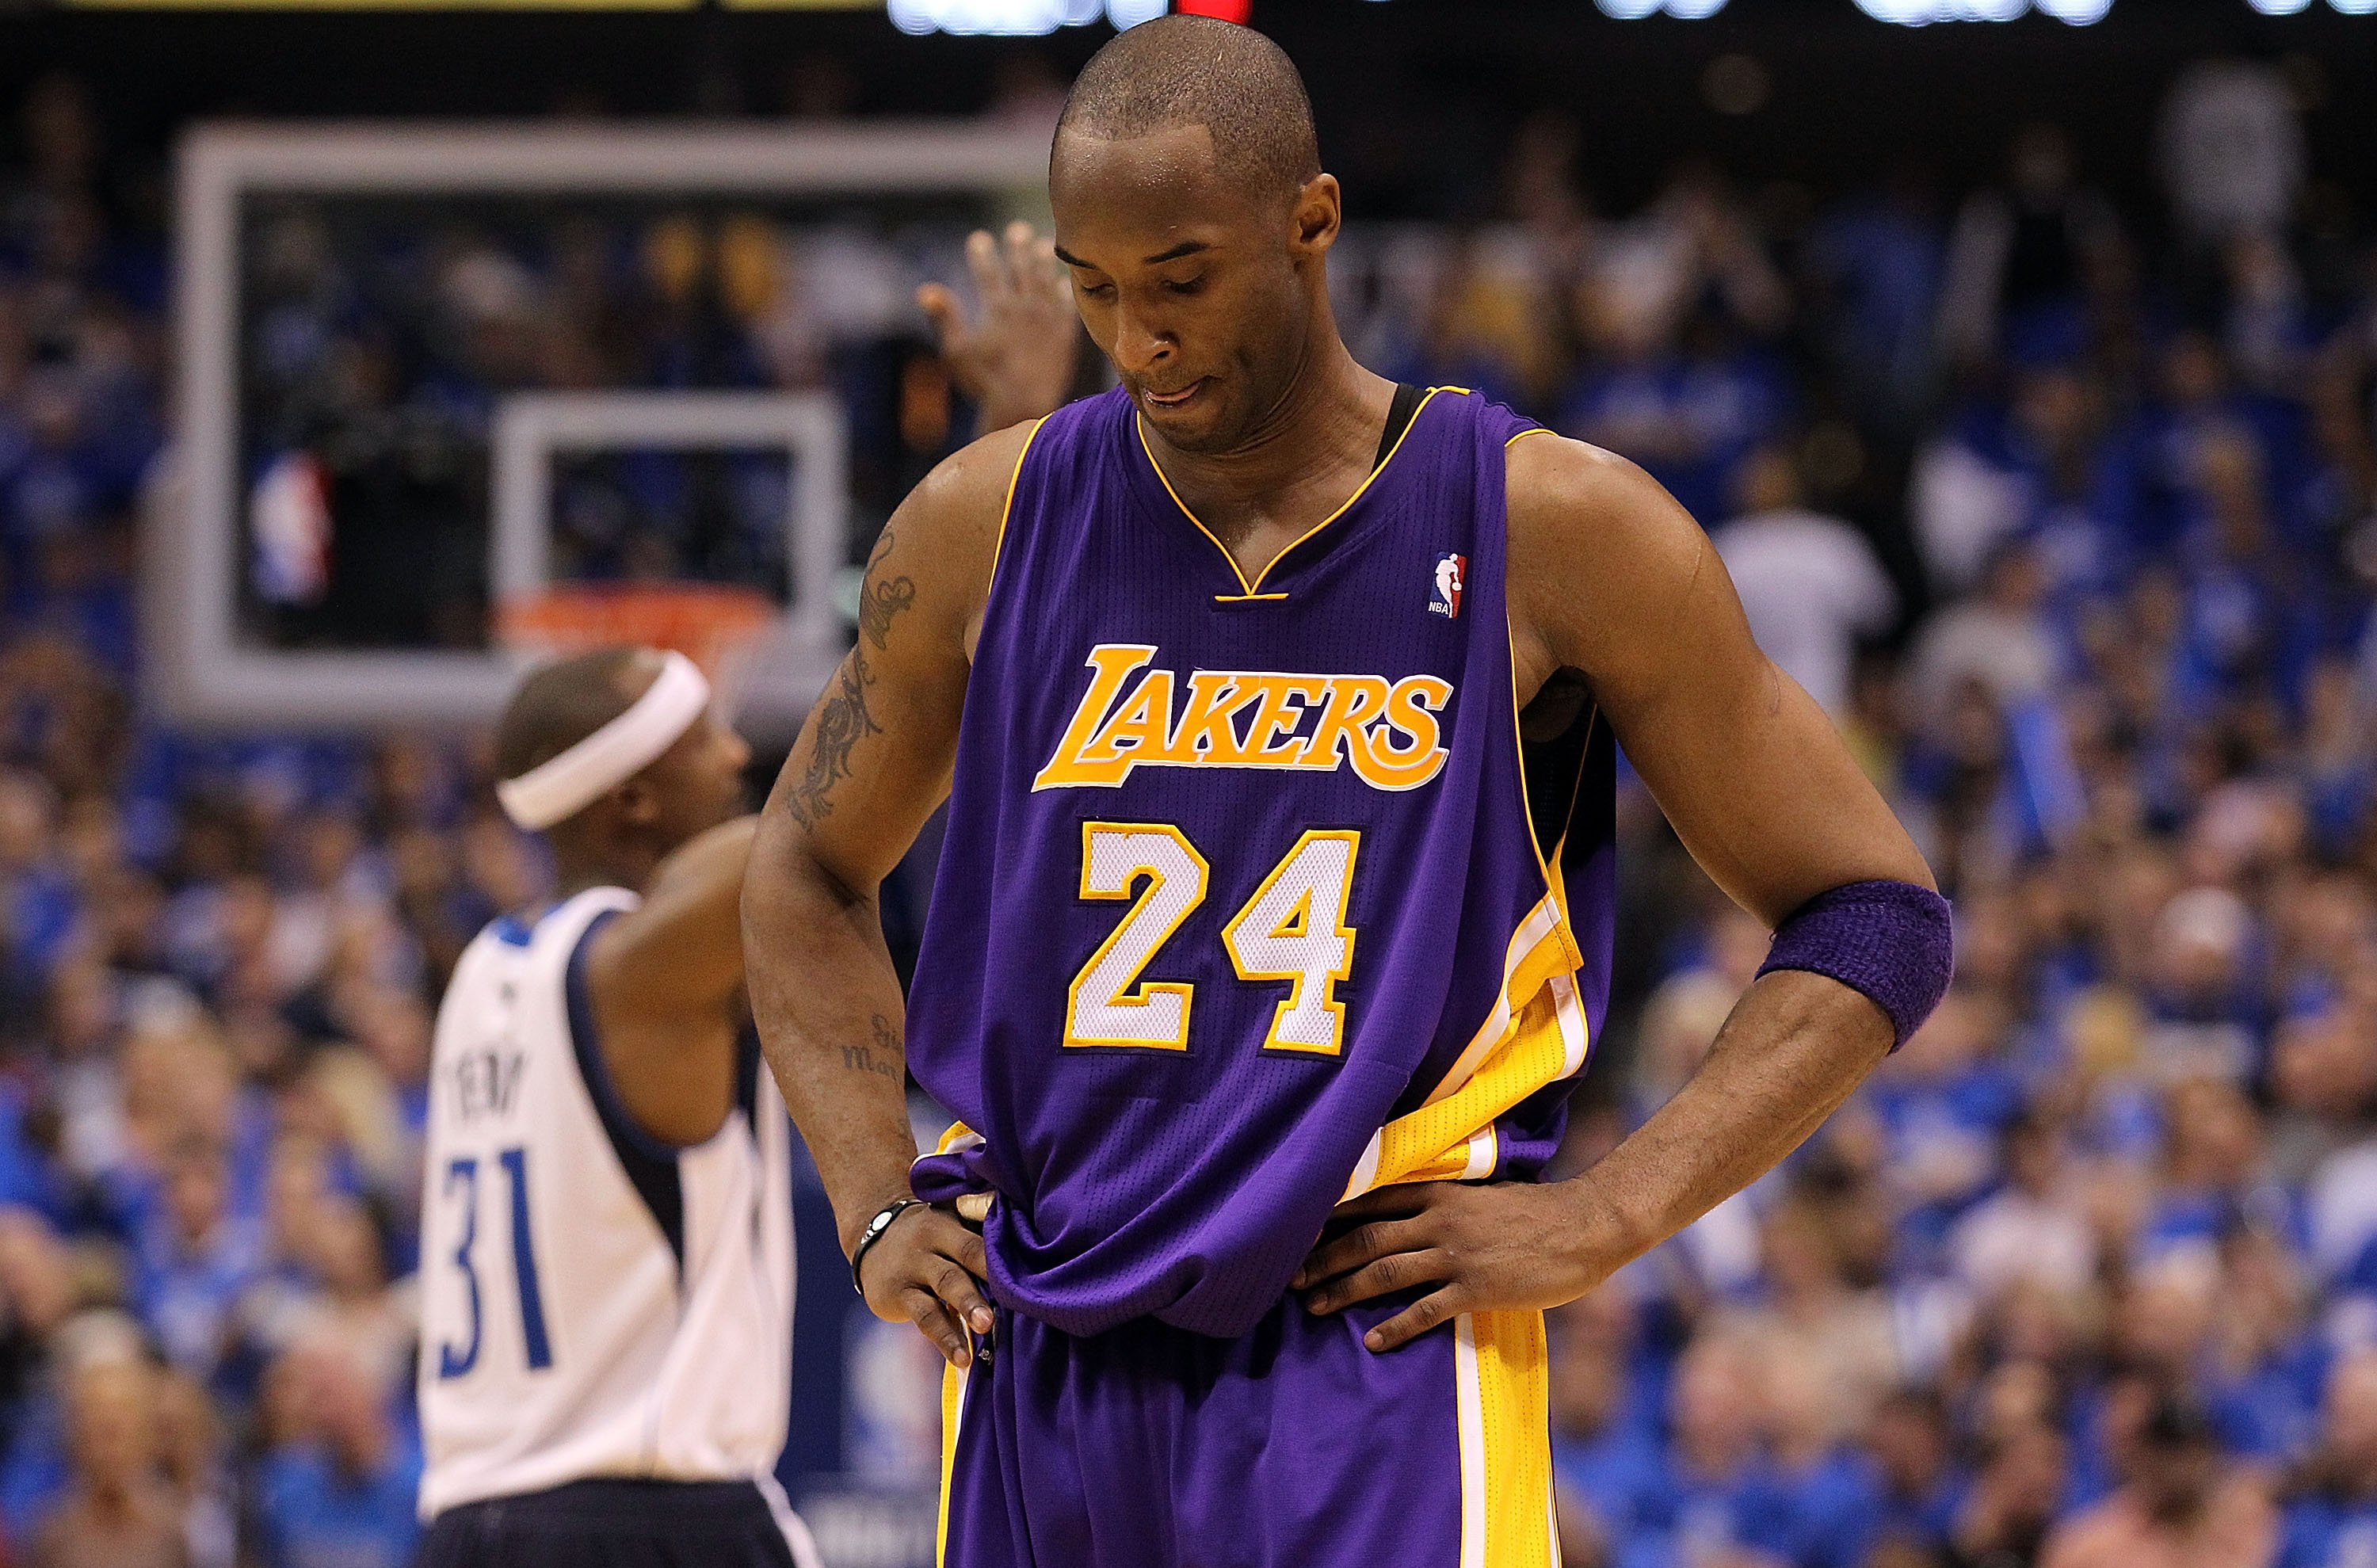 DALLAS, TX - MAY 06:  Guard Kobe Bryant #24 of the Los Angeles Lakers reacts during a 98-92 loss against the Dallas Mavericks in Game Three of the Western Conference Semifinals during the 2011 NBA Playoffs on May 6, 2011 at American Airlines Center in Dal